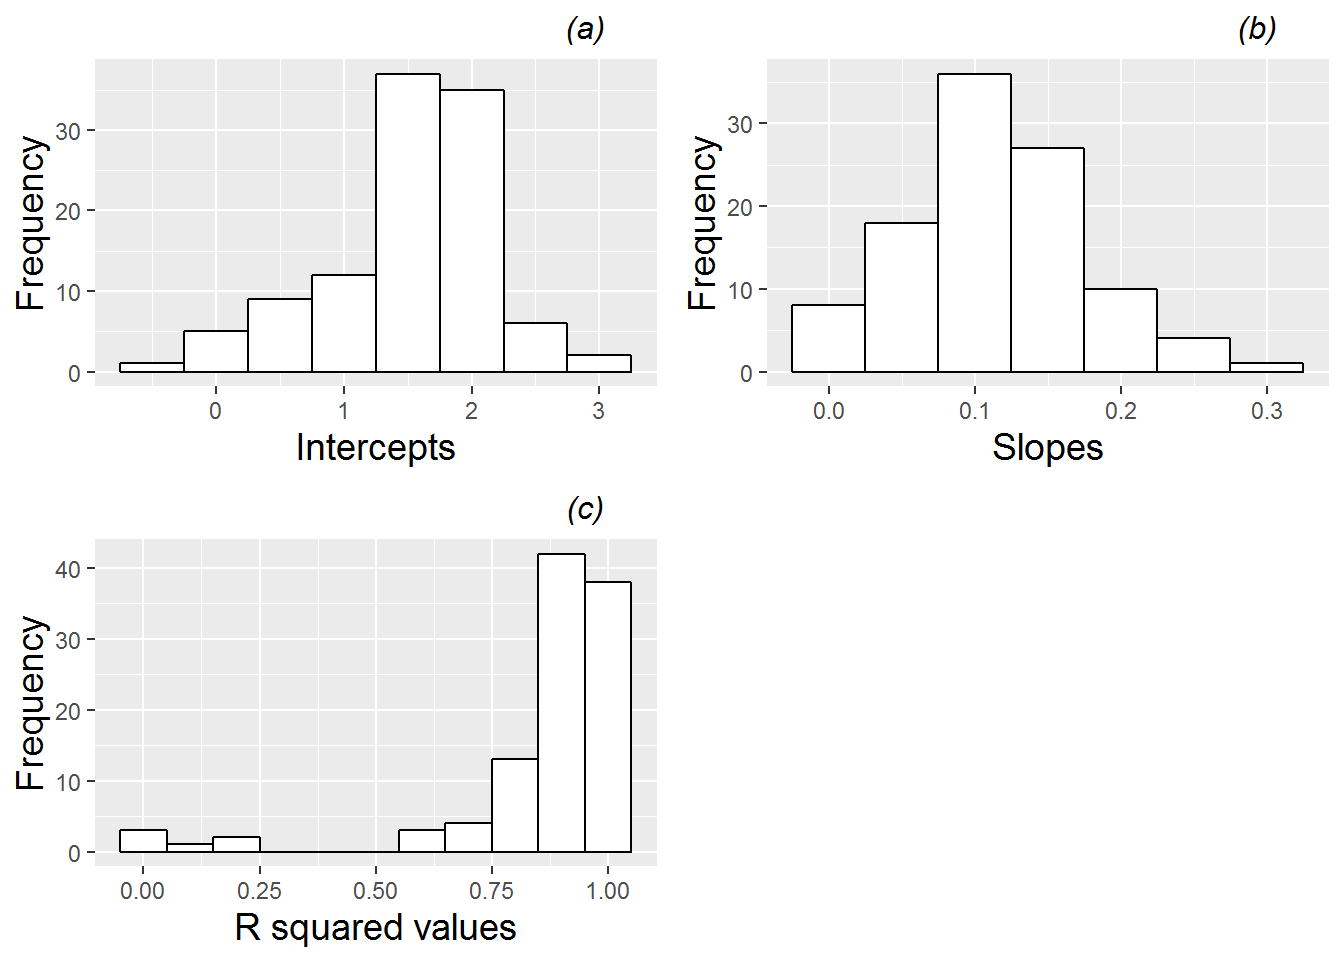  Histograms of (a) intercepts, (b) slopes, and (c) R-squared values for linear fits across all leadplants.